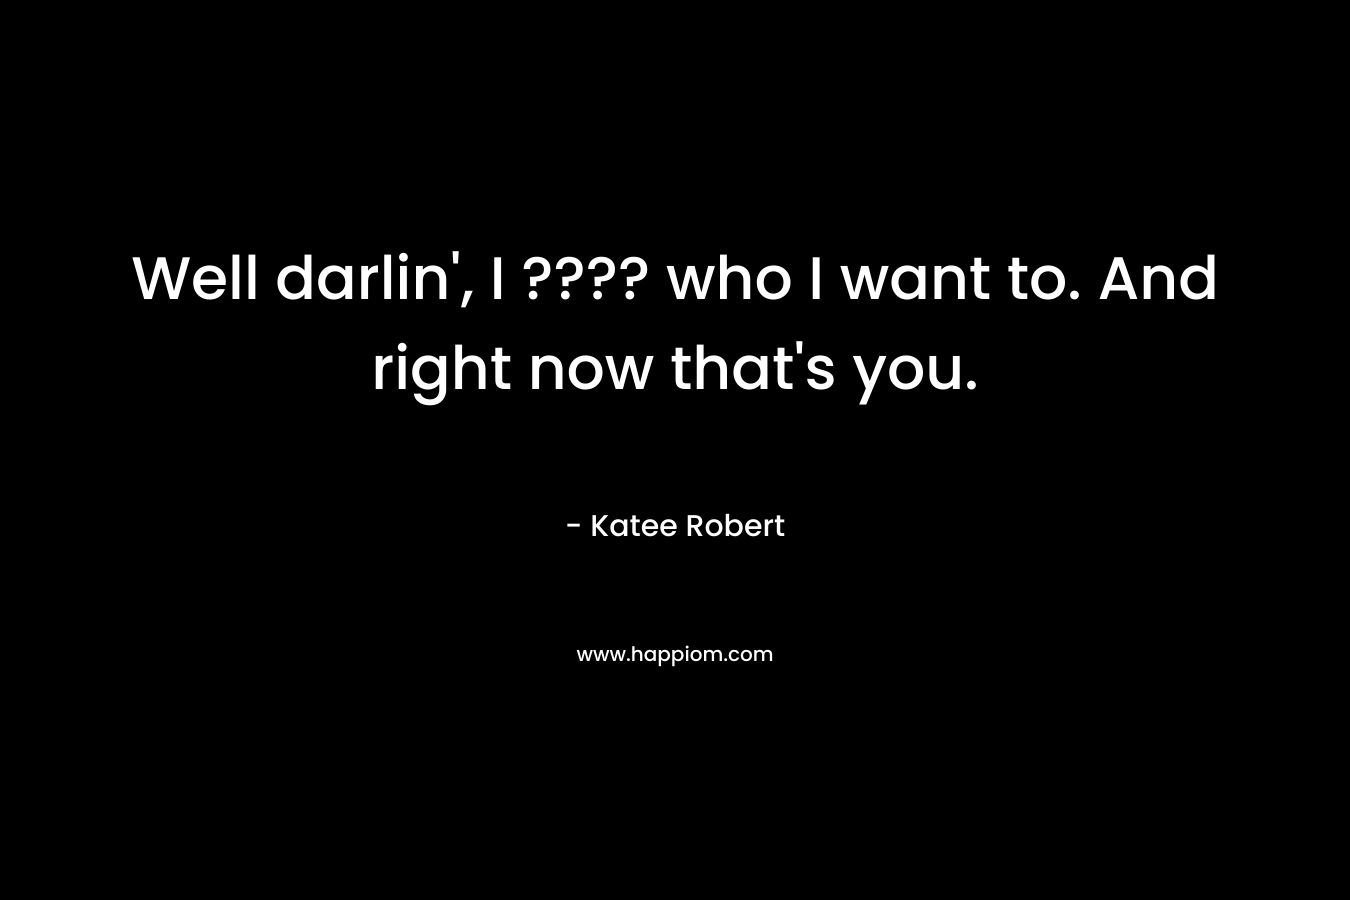 Well darlin’, I ???? who I want to. And right now that’s you. – Katee Robert